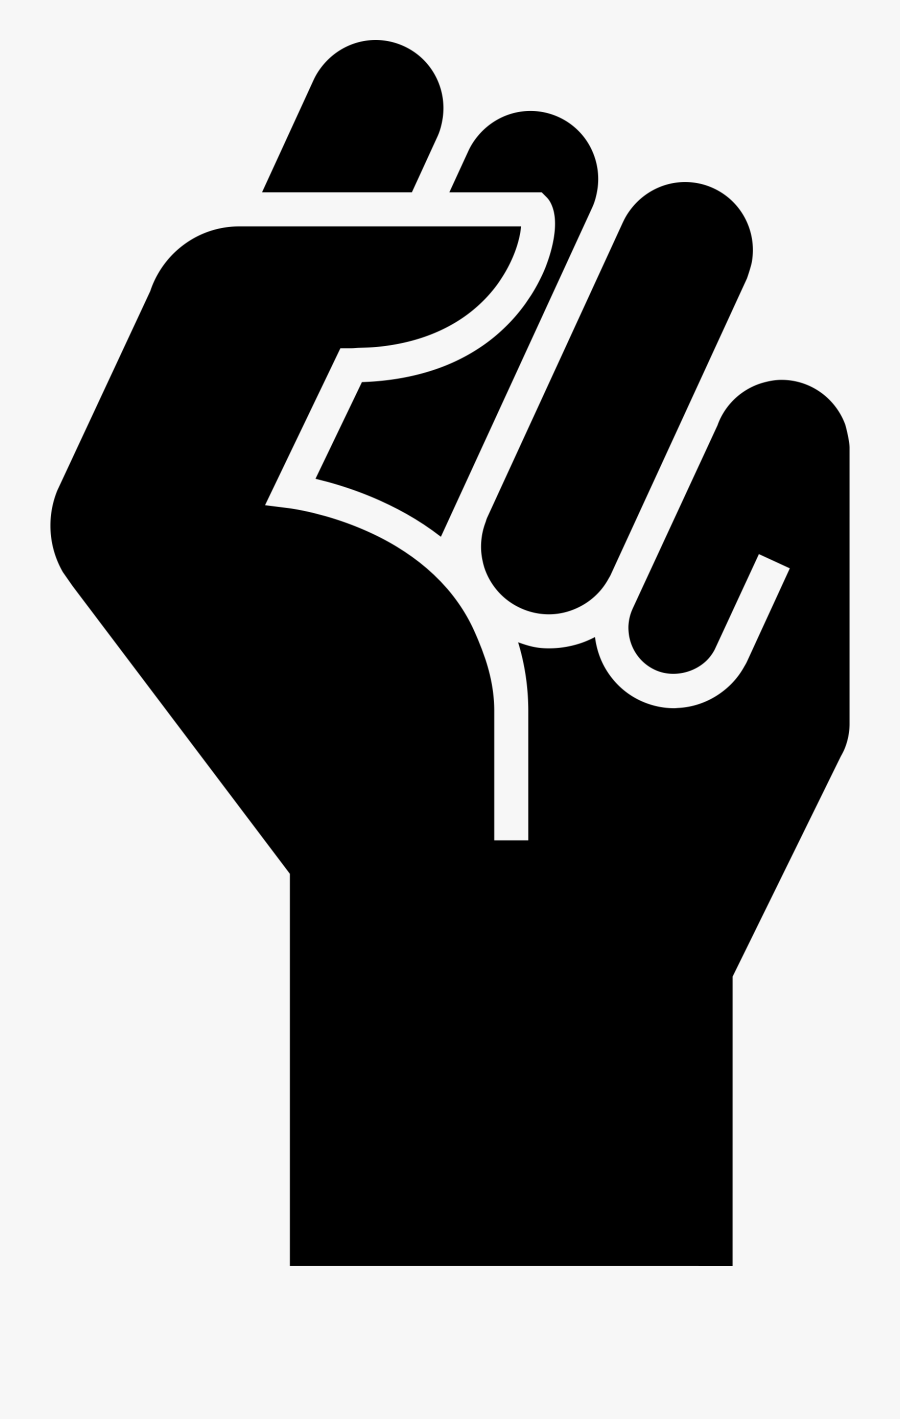 Protester Panda Free Images - Protest Symbol Png, Transparent Clipart